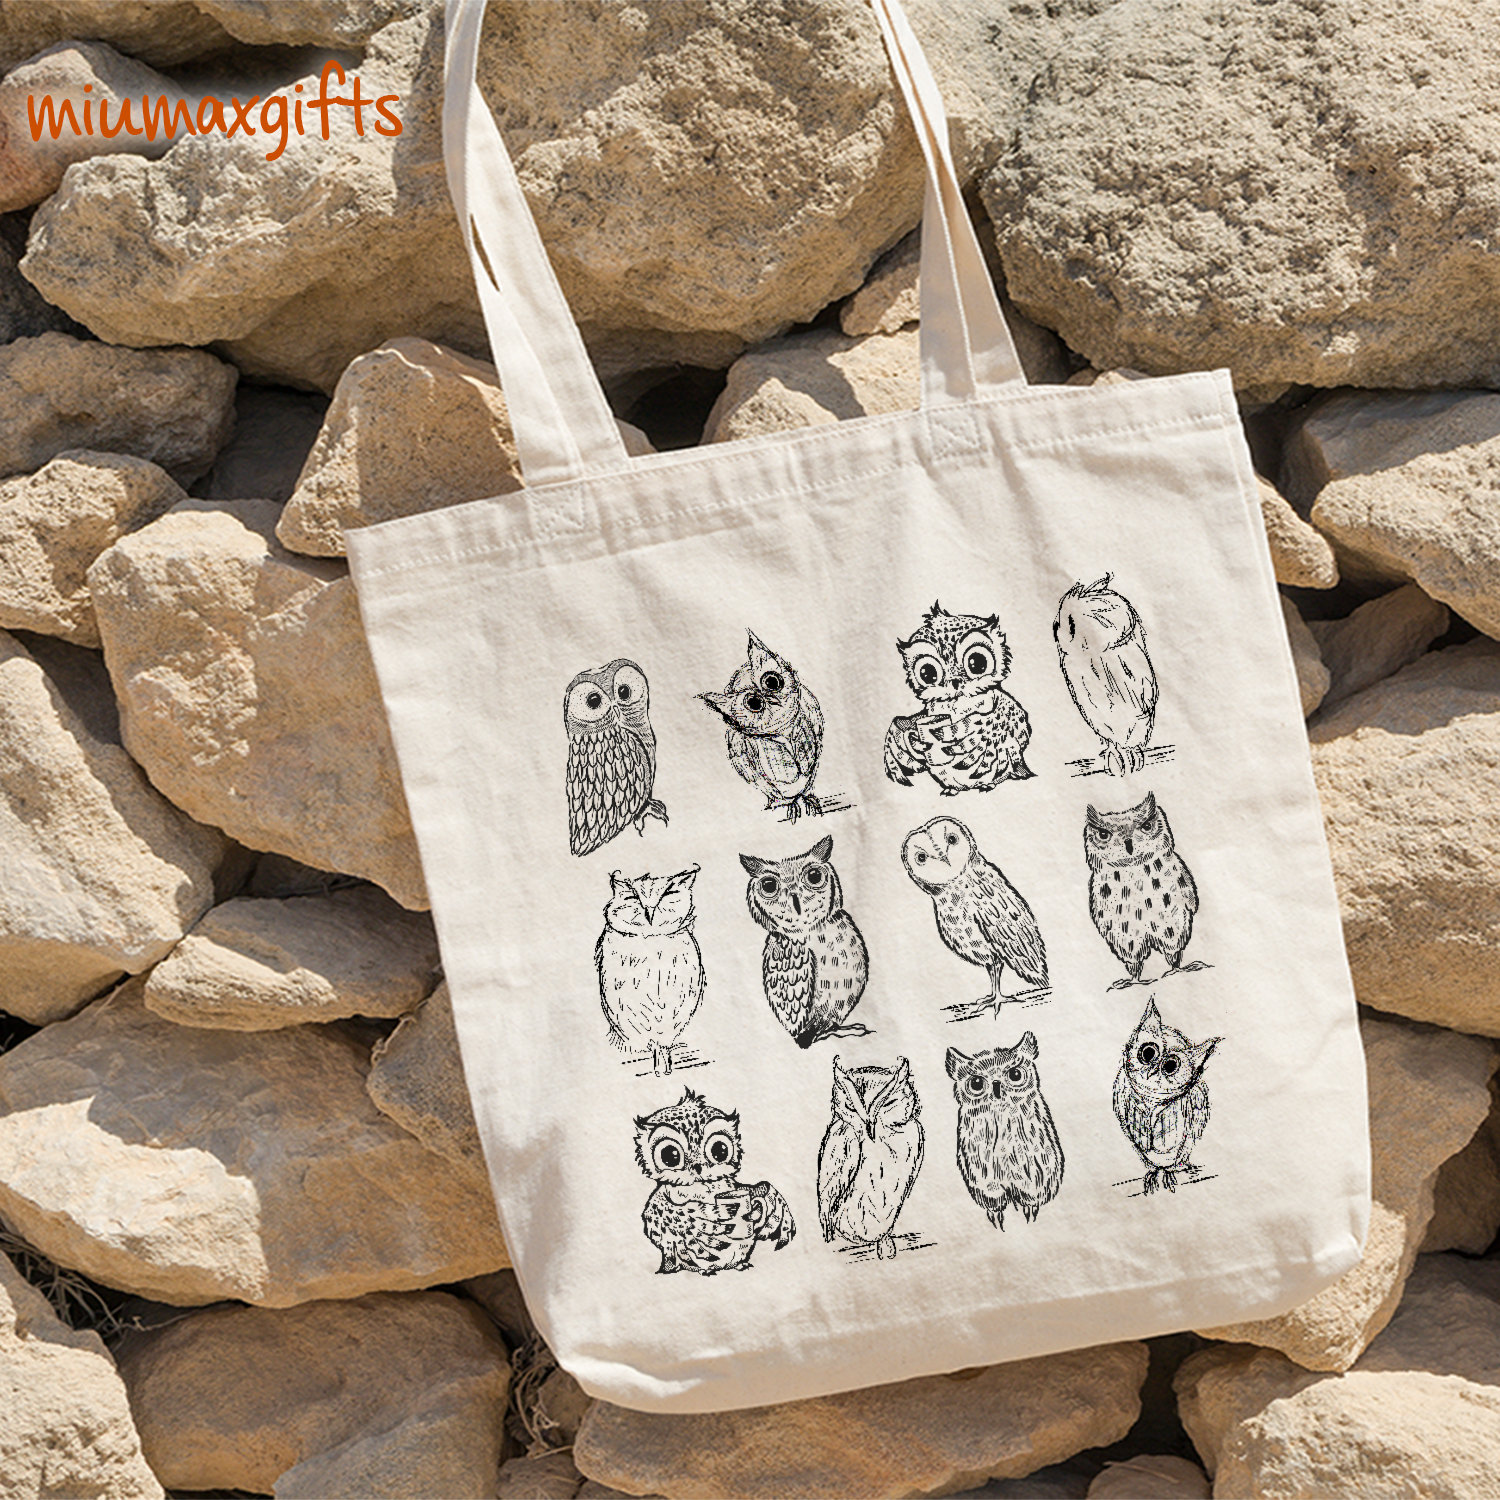 Forest Floor Tote Bag, Enchanted Forest Bags, Knitting Project Bag Owl